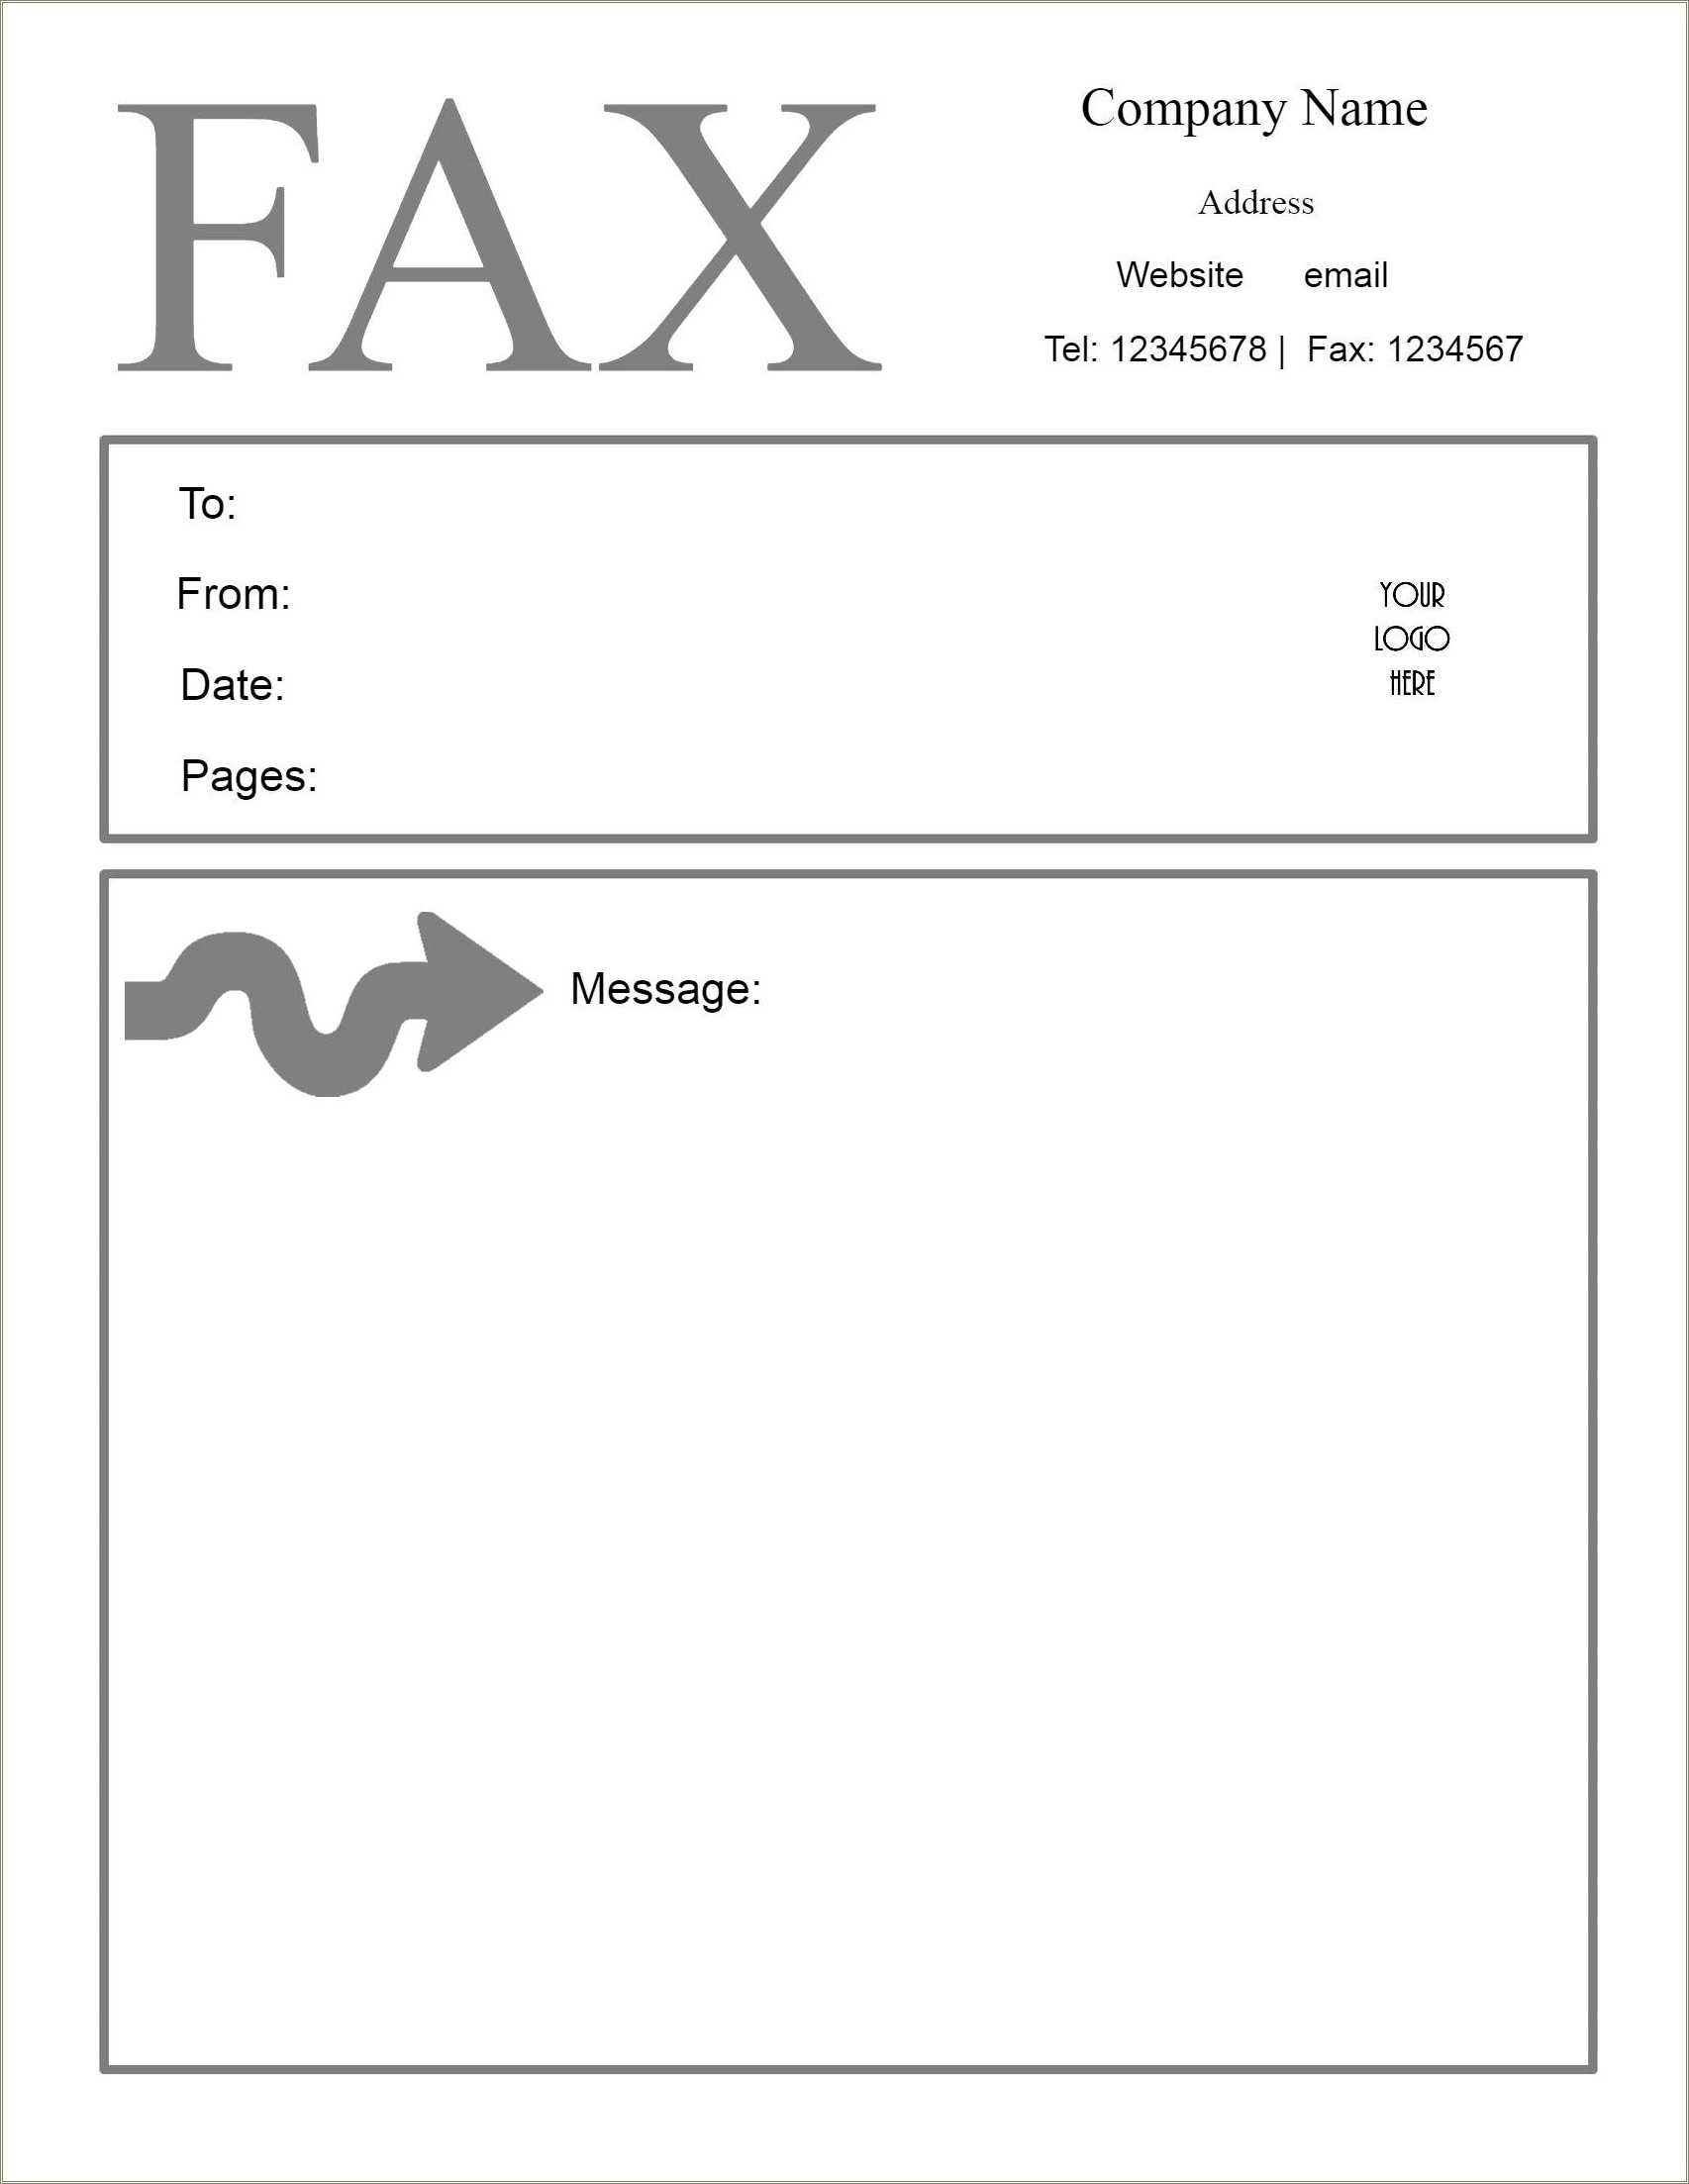 Fax Cover Sheet For Cover Letter And Resume